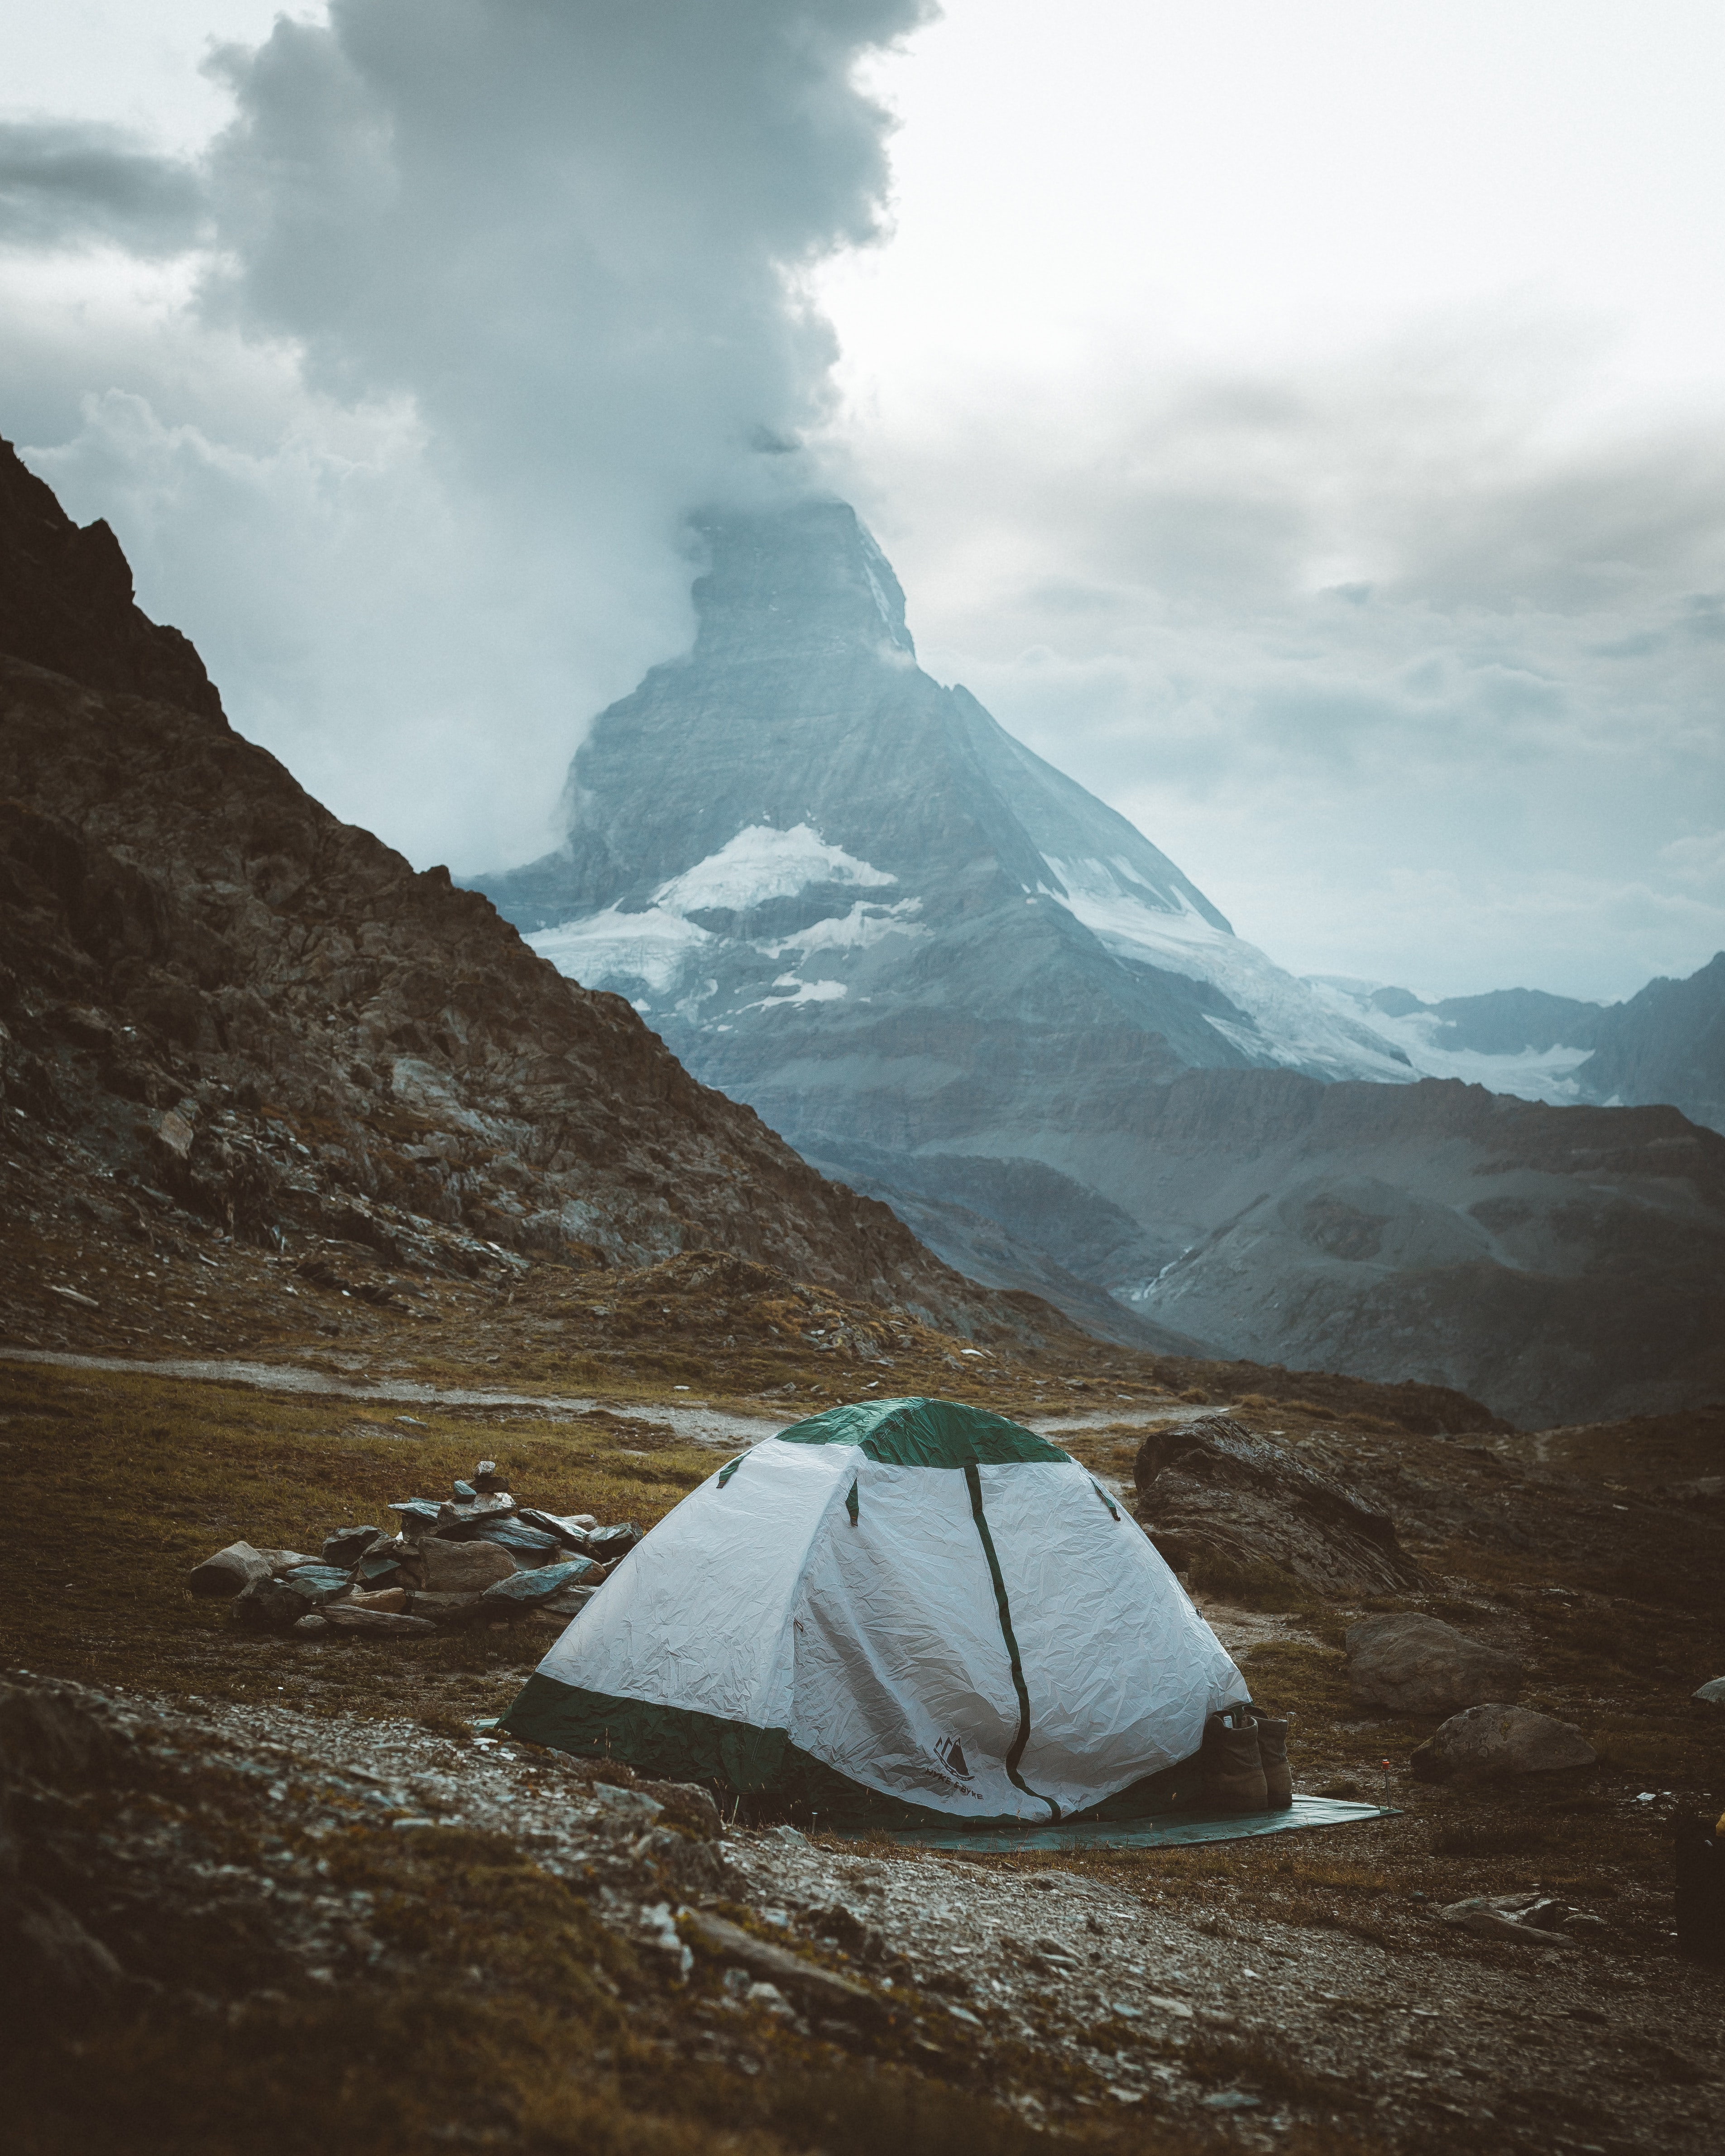 mountains, camping, nature, rocks, tent, campsite